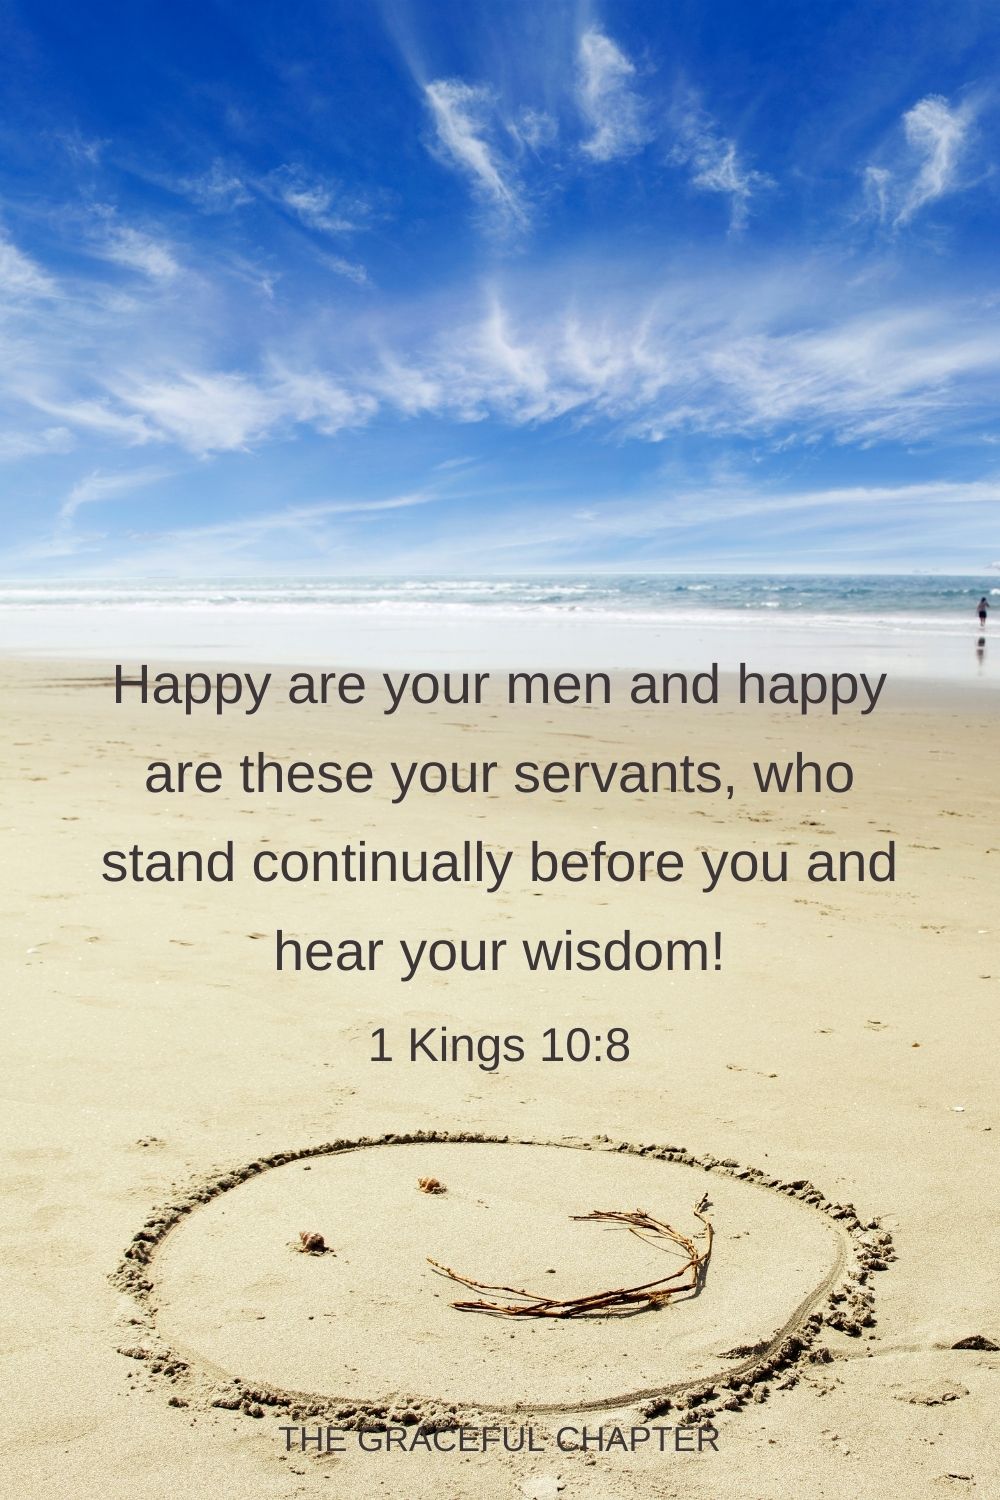 Happy are your men and happy are these your servants, who stand continually before you and hear your wisdom! 1 Kings 10:8